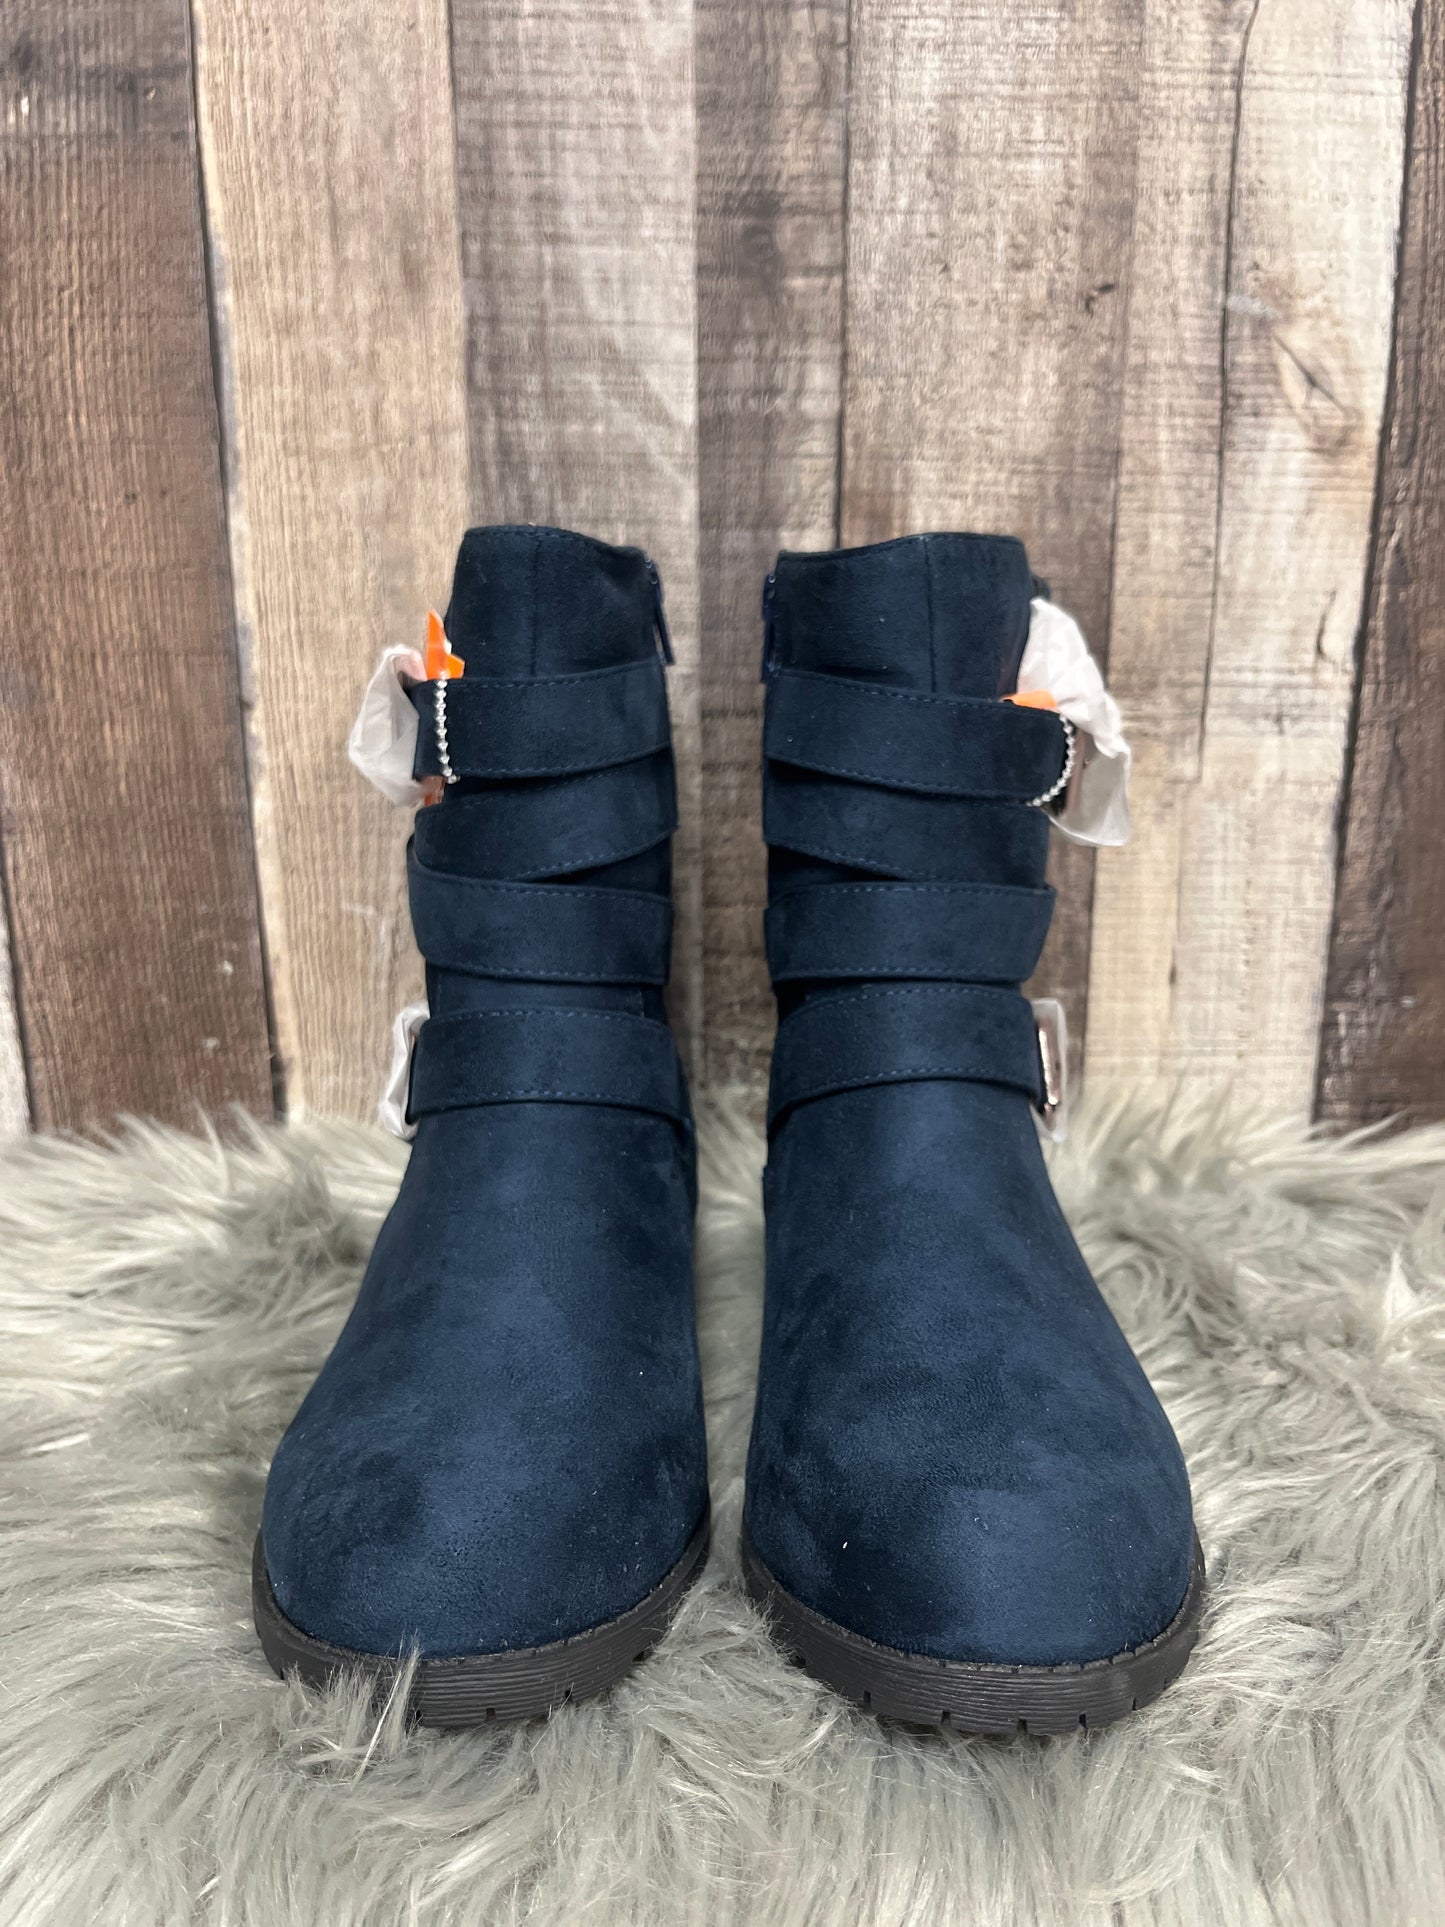 Boots Ankle Flats By Comfortview  Size: 7.5